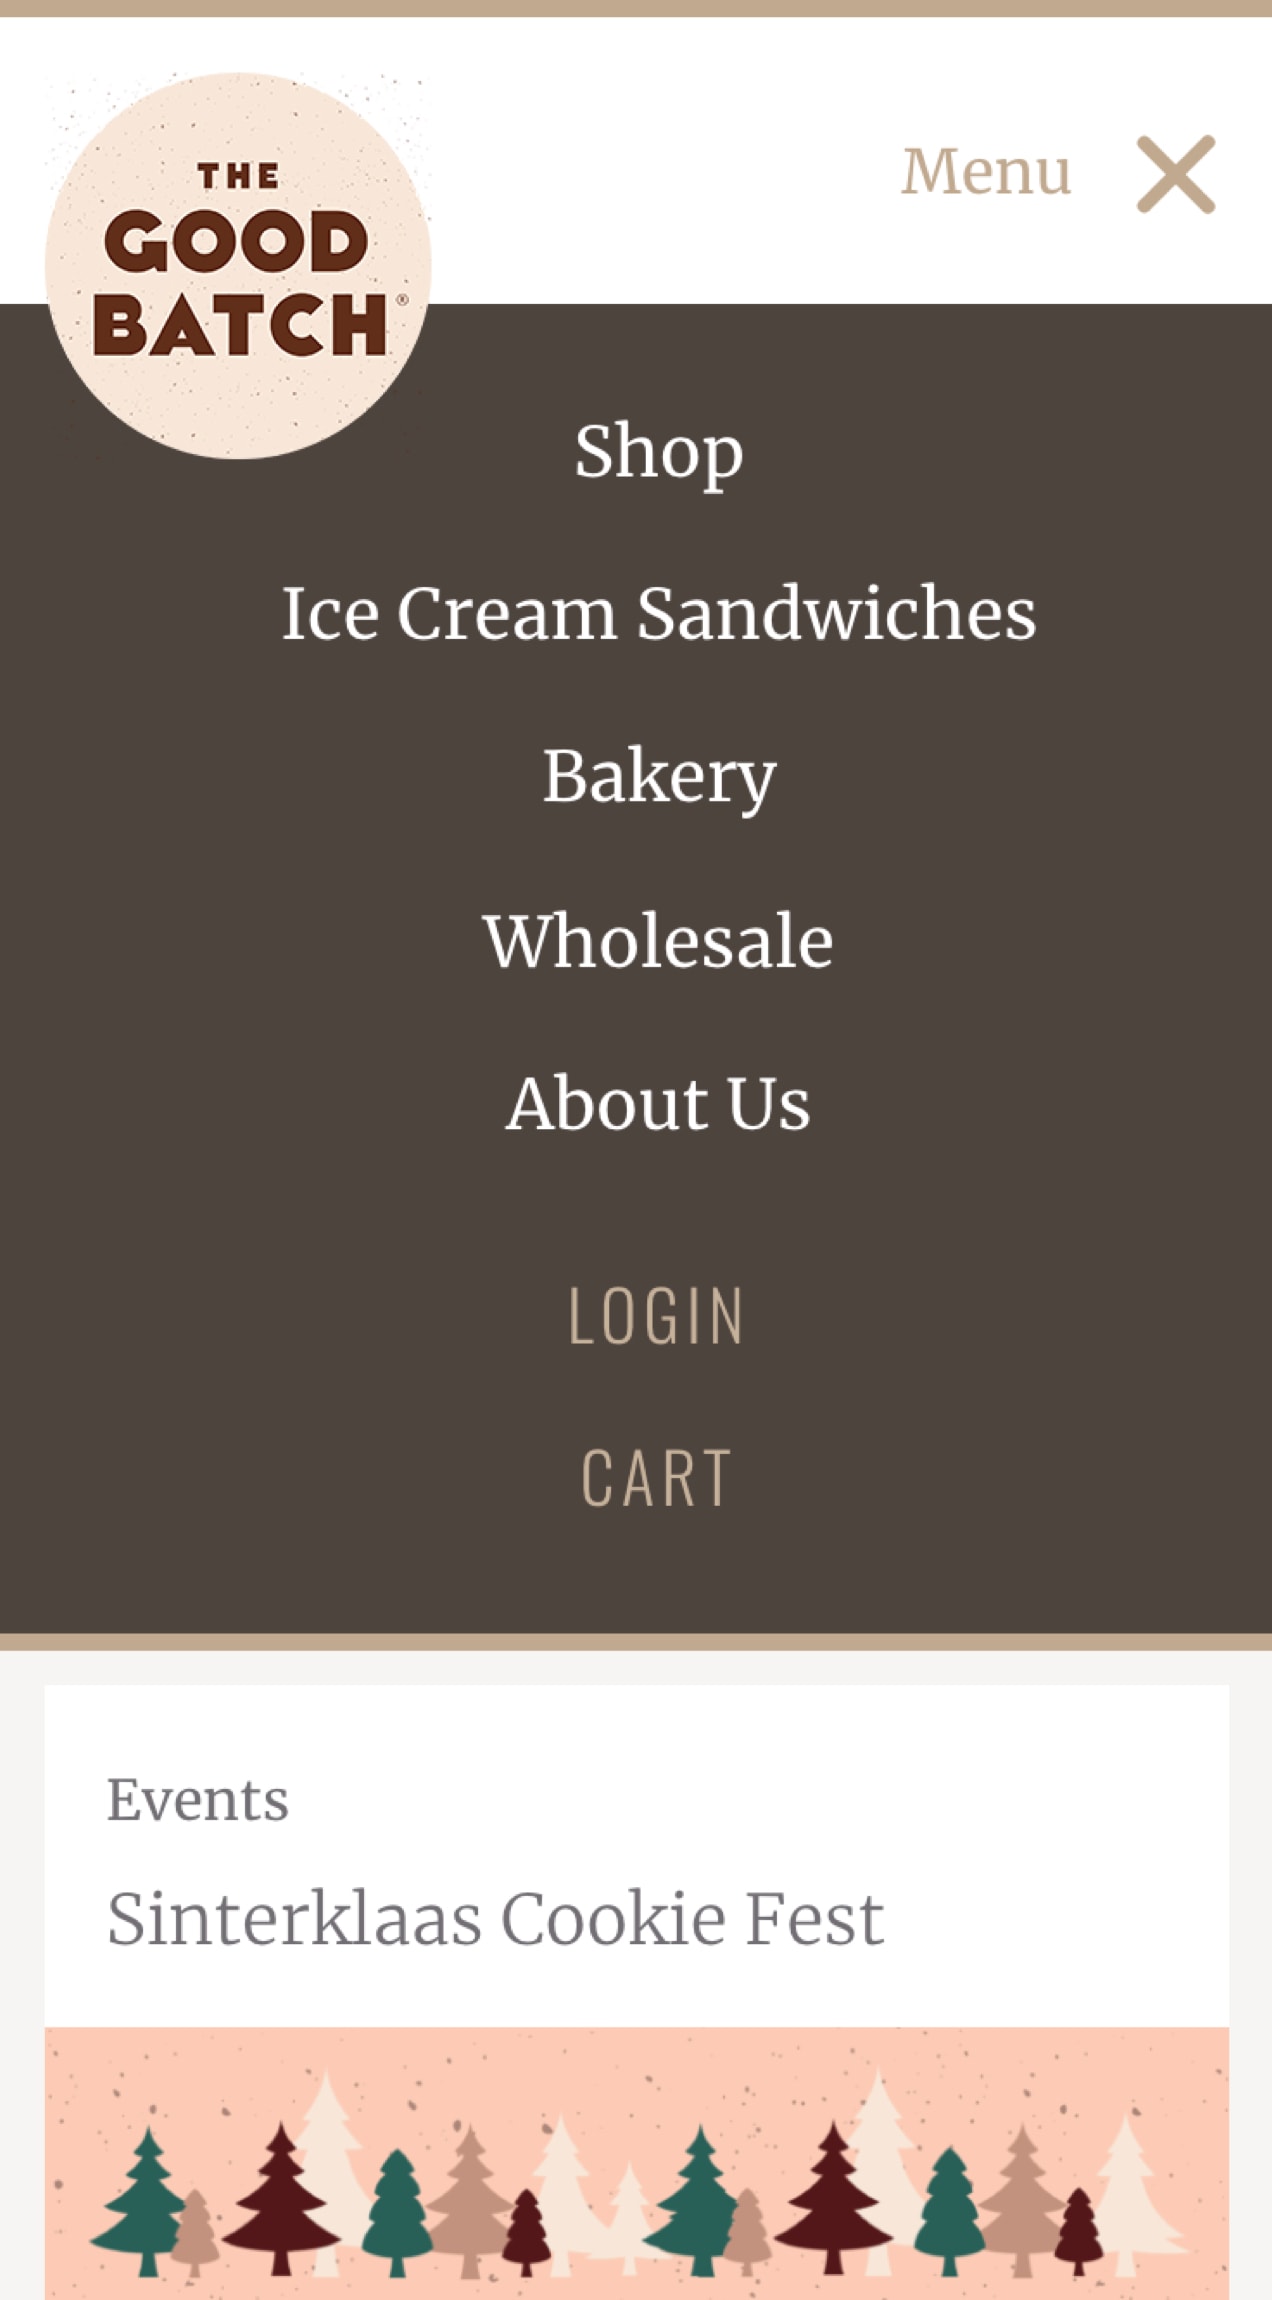 The Good Batch mobile menu expanded